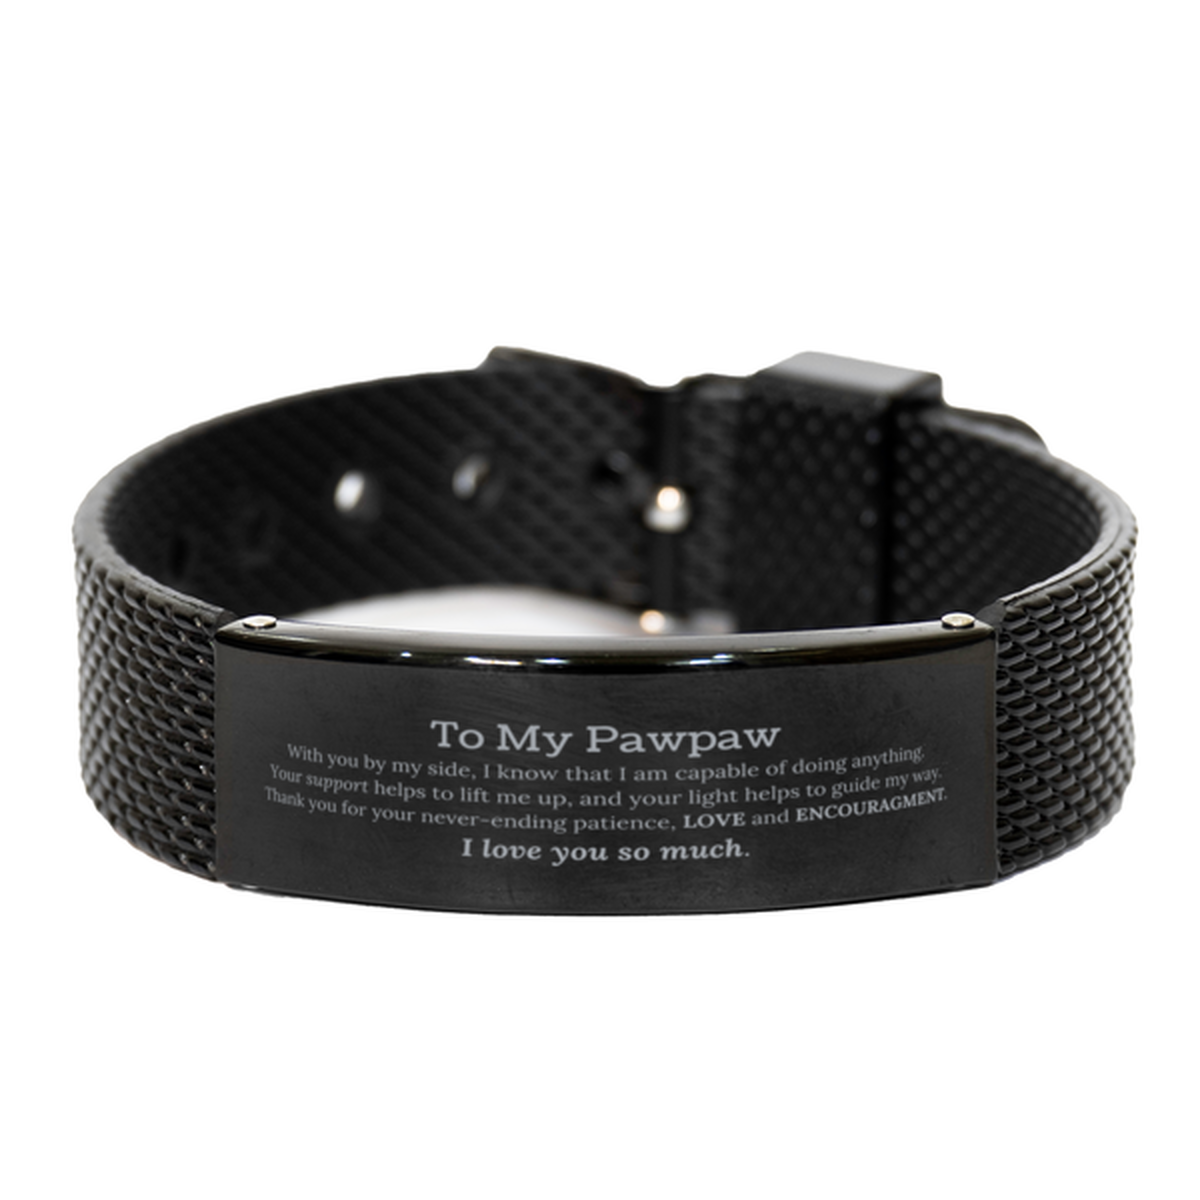 Appreciation Pawpaw Black Shark Mesh Bracelet Gifts, To My Pawpaw Birthday Christmas Wedding Keepsake Gifts for Pawpaw With you by my side, I know that I am capable of doing anything. I love you so much